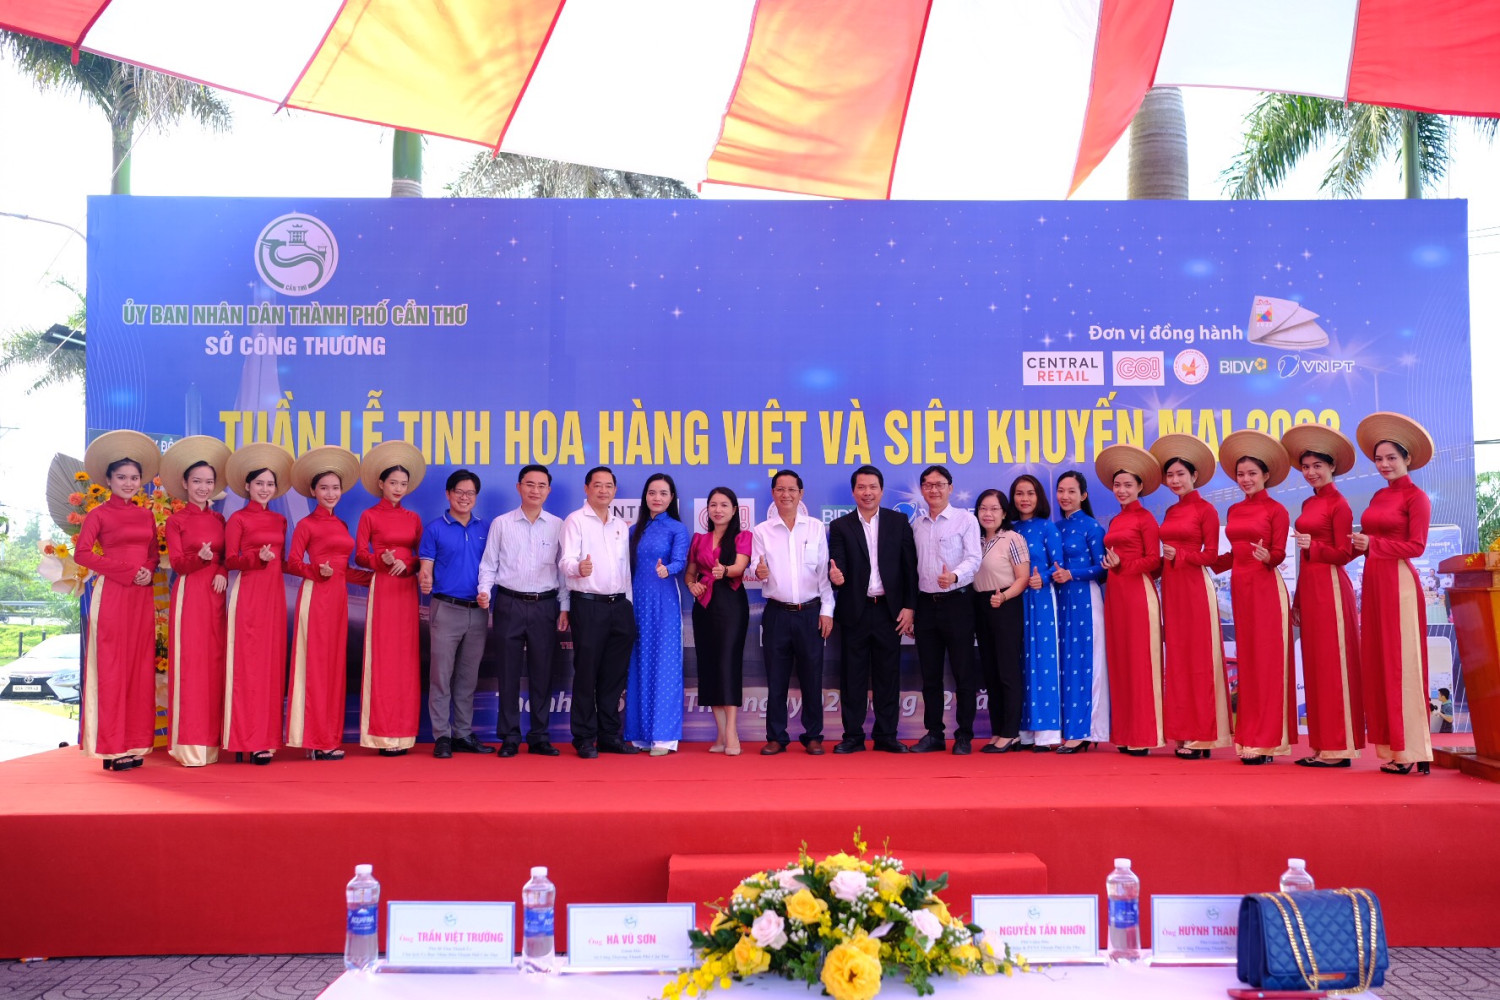 Vietnamese Goods Week and Super Promotions 2022 in Can Tho City